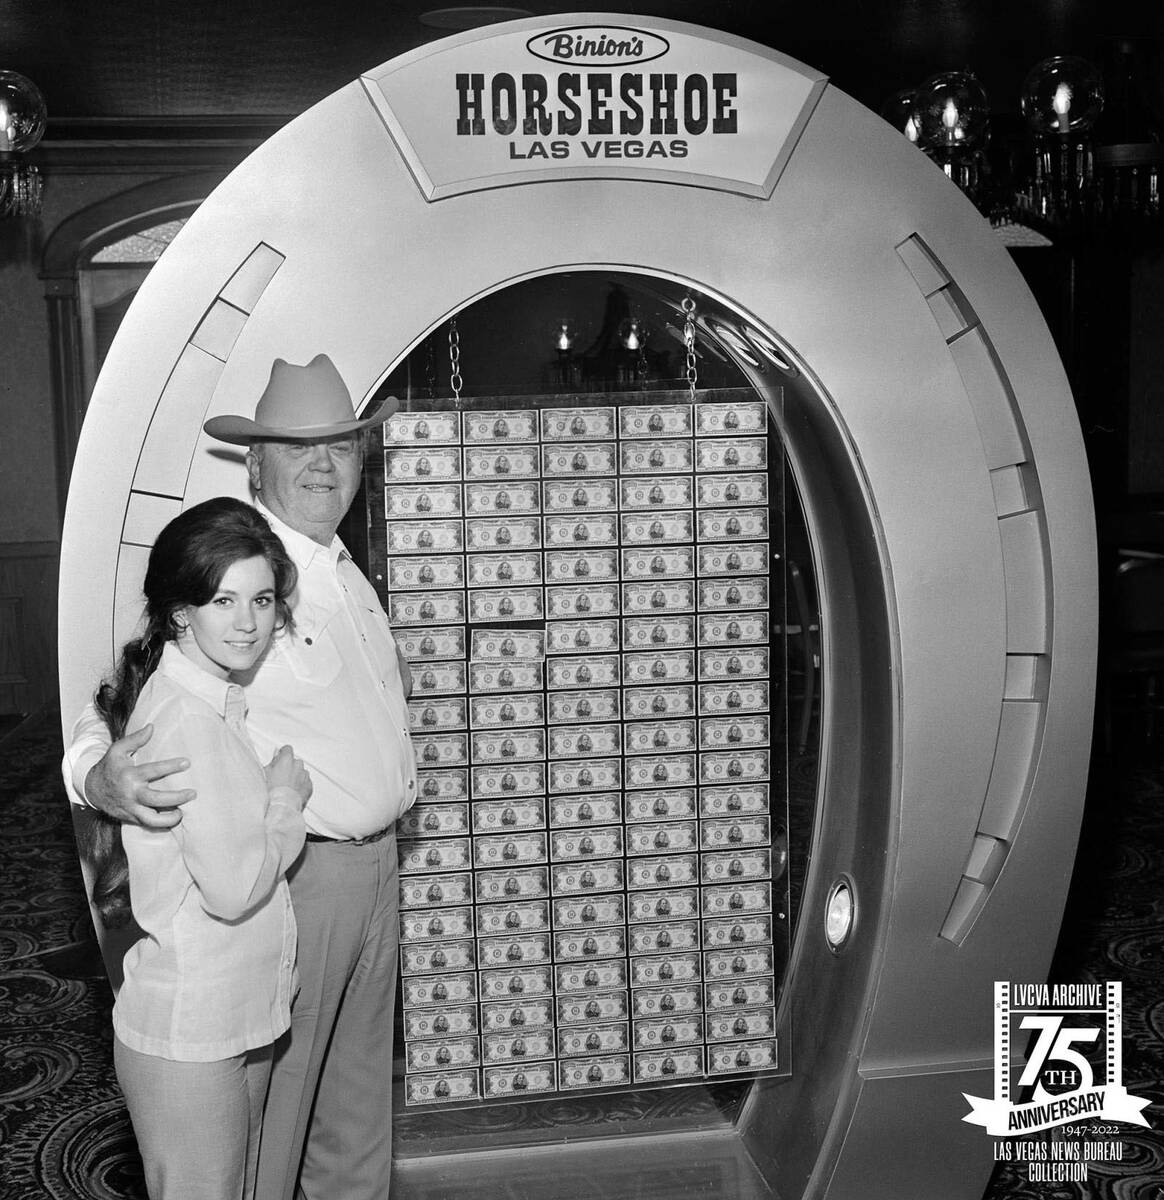 Binion's Horseshoe casino was known for its million dollar display. Pictured here, Benny Binion ...